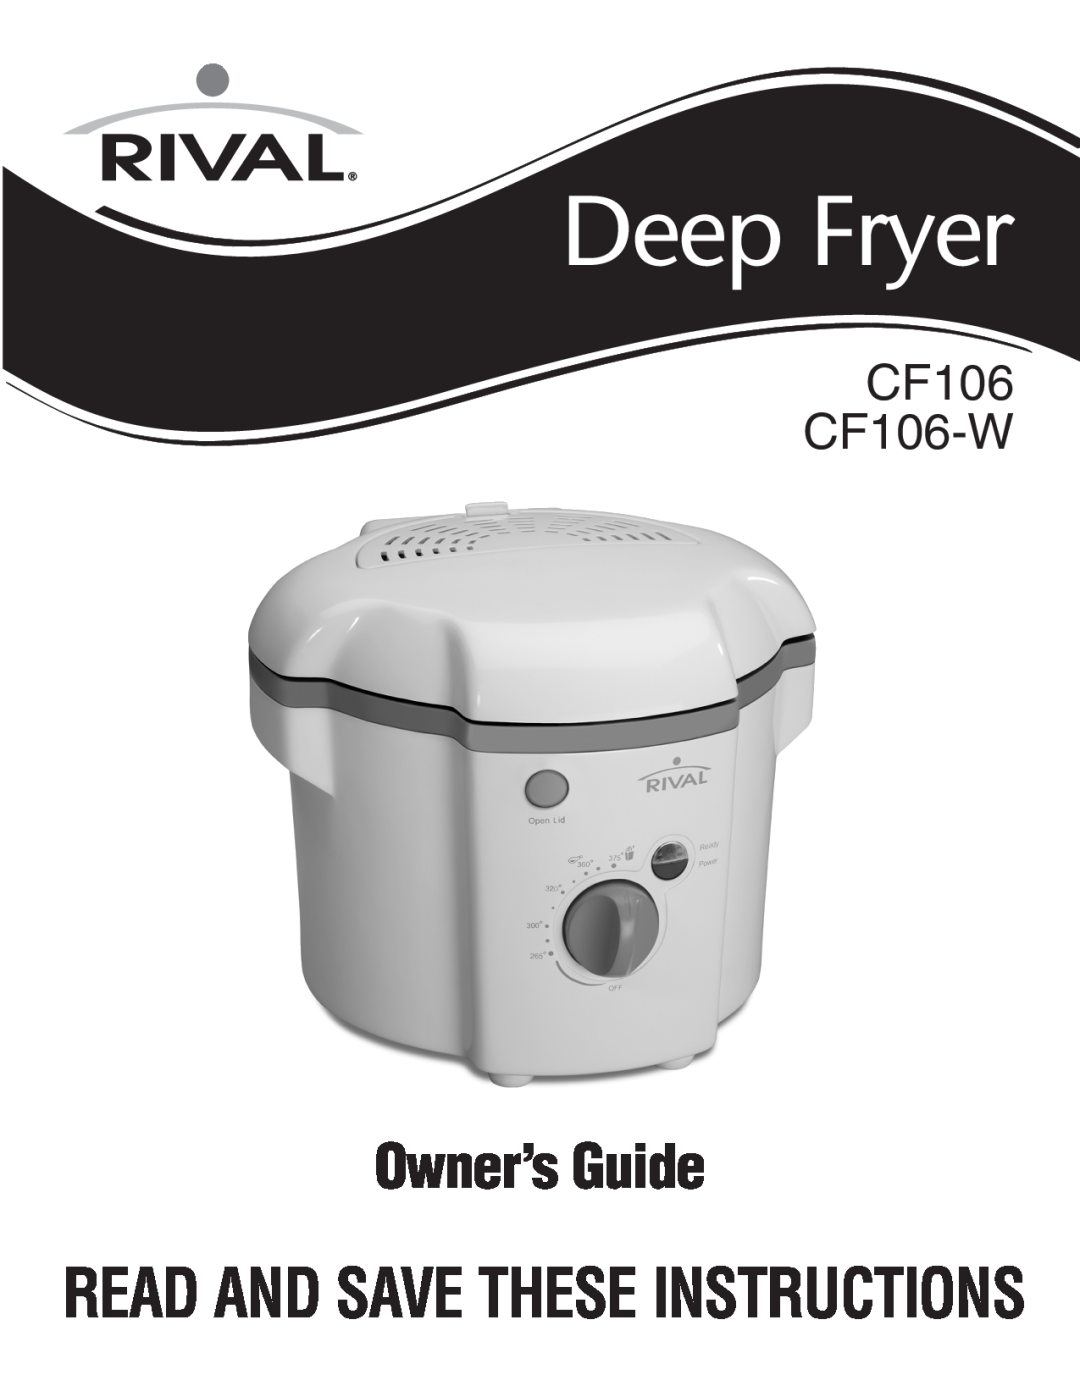 Rival manual Deep Fryer, Owner’sGuide, Read And Savethese Instructions, CF106 CF106-W 